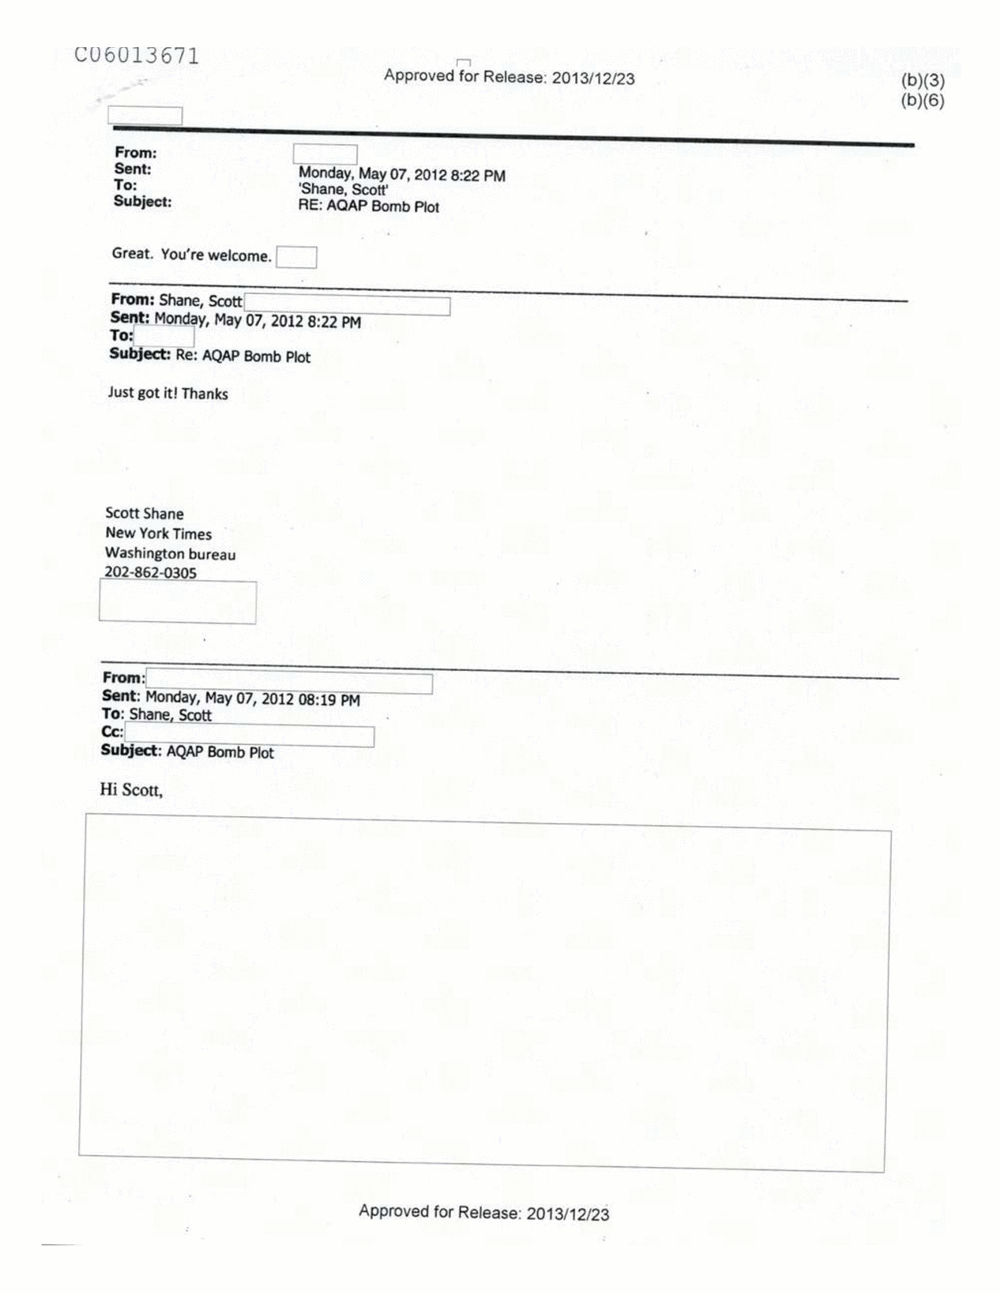 Page 521 from Email Correspondence Between Reporters and CIA Flacks